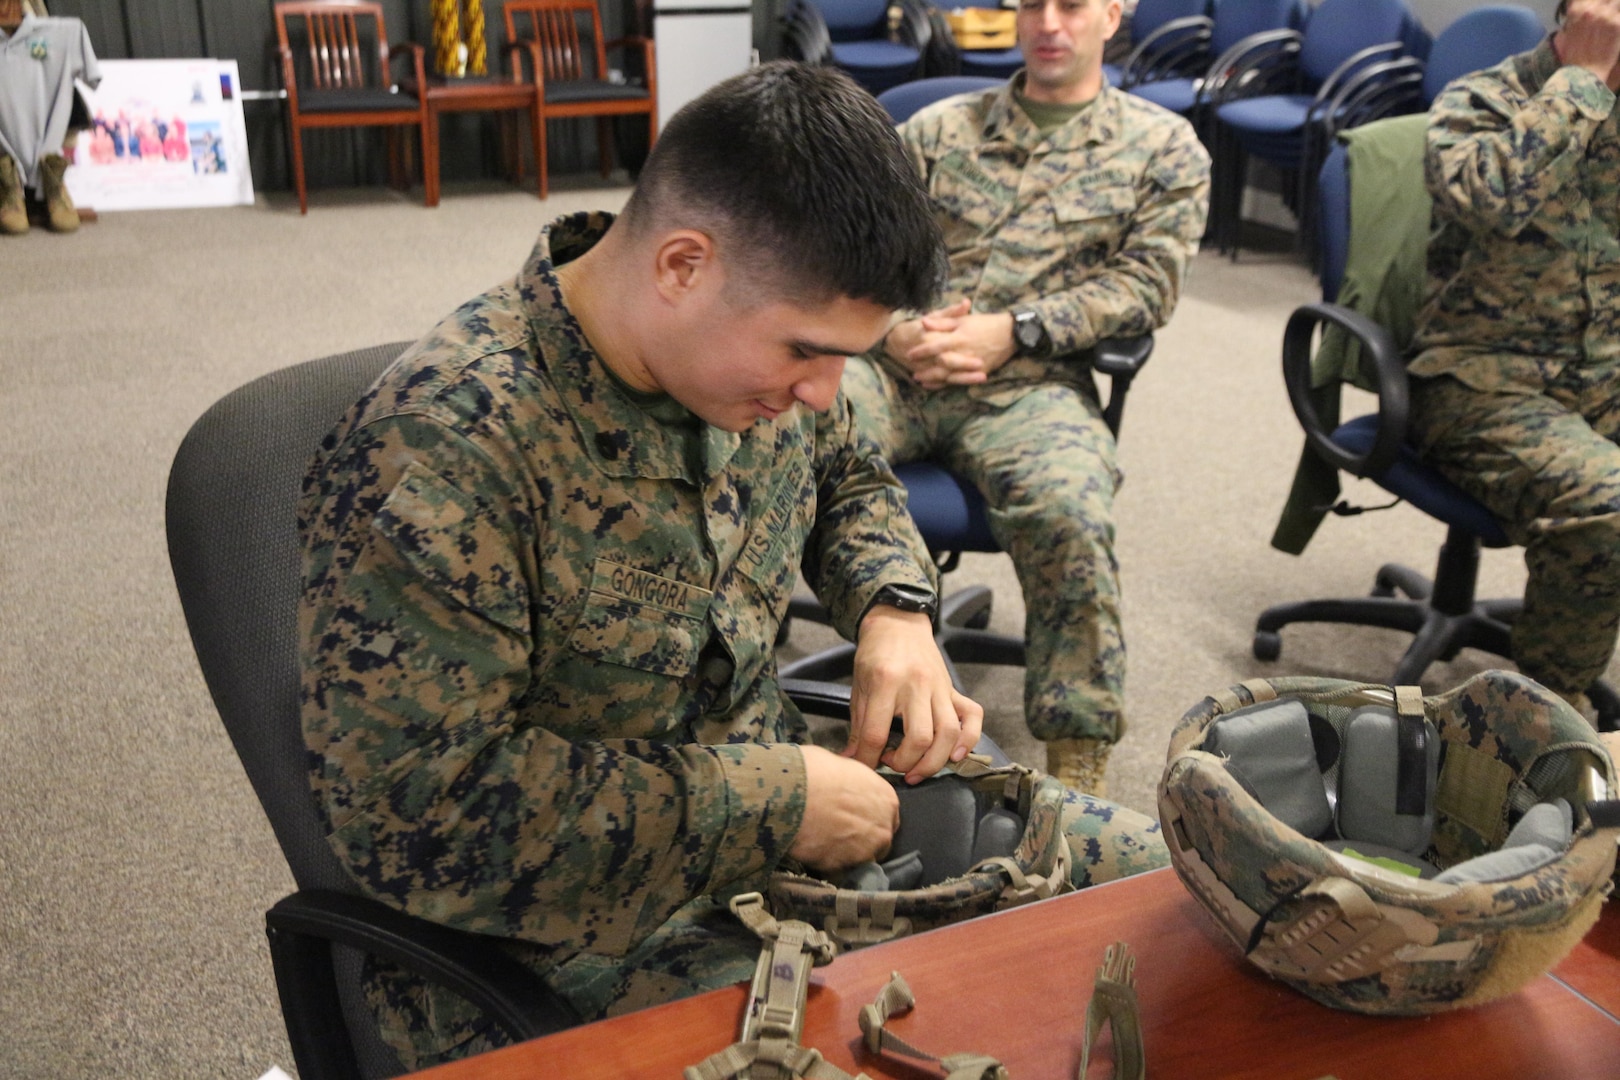 Staff Sgt. Aldo Gongora with School of Infantry–East from Camp Lejeune, N.C., evaluates a helmet retention system during an Infantry Equipping Challenge limited user evaluation in December aboard Marine Corps Base Quantico, Va. The Infantry Equipping Challenge is an ongoing effort at Marine Corps Systems Command to leverage new and emerging technologies from industry to enhance the capability of Infantry Marines. (U.S. Marine Corps photo by Ashley Calingo)